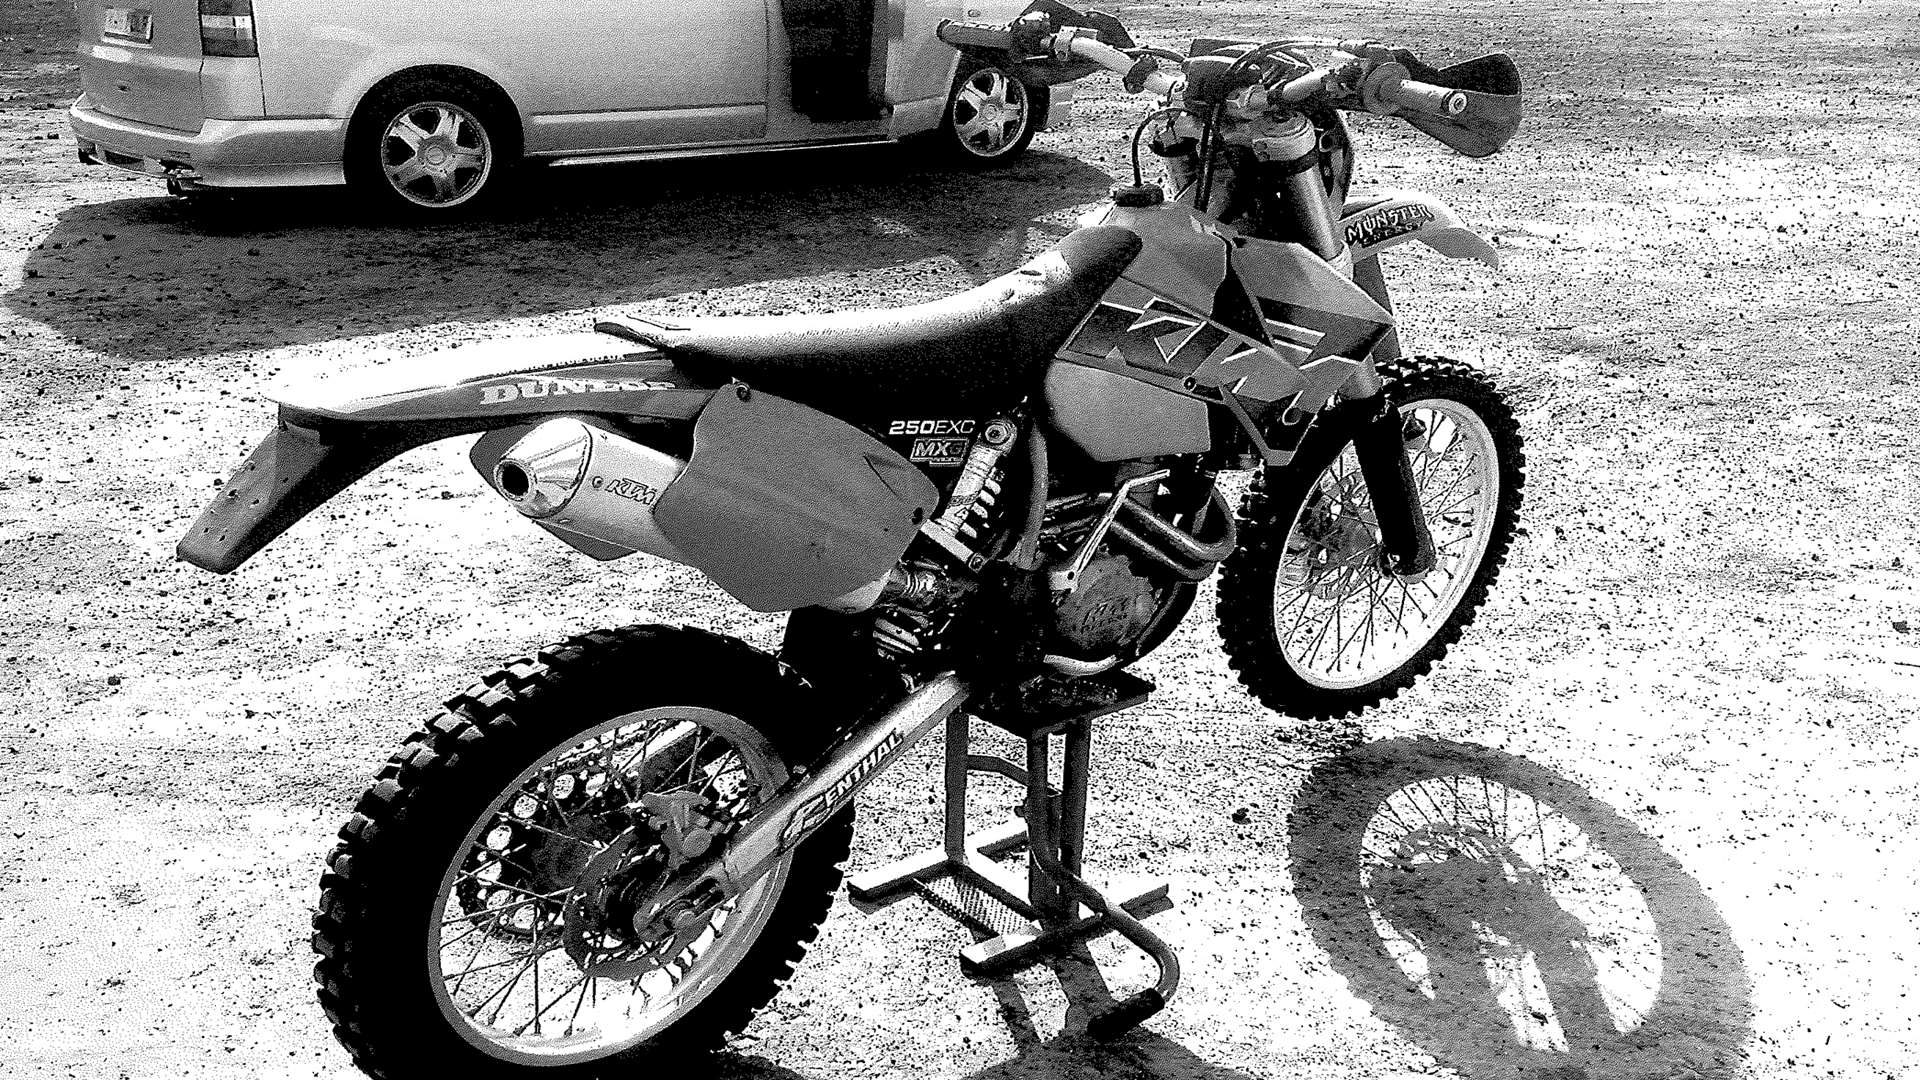 Kent Police has released a photo of a motorcross bike in a bid to trace it after it was reportedly stolen from Dartford.